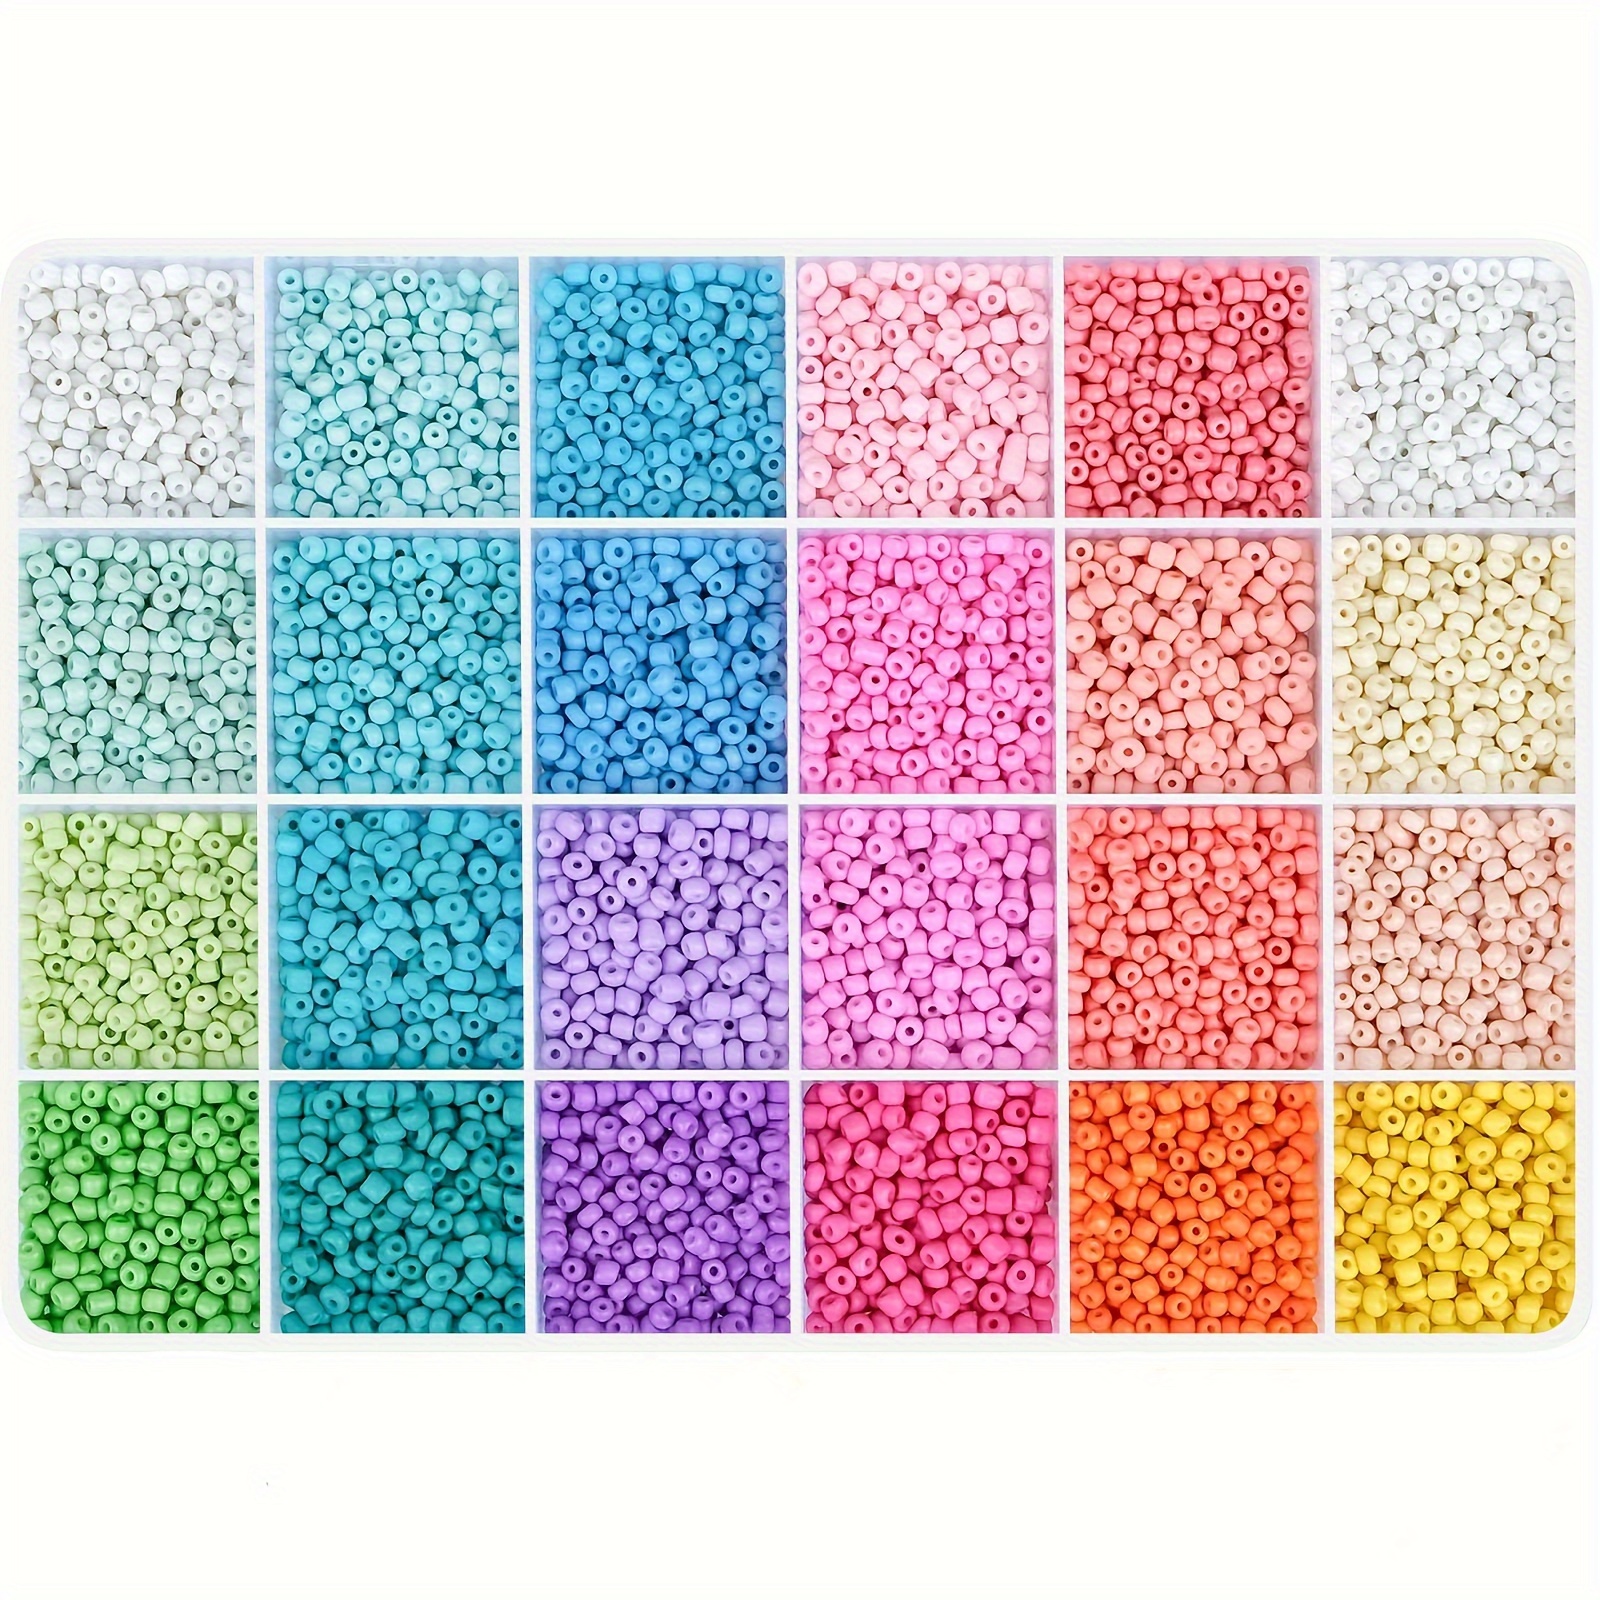 

9600pcs 3mm Glass Seed Rice Beads Case Box 24 Colors Macaroon Set, Friendship Diy Bracelet Necklace Earrings Clothing Pet Accessories Crafts Jewelry Making Supplies